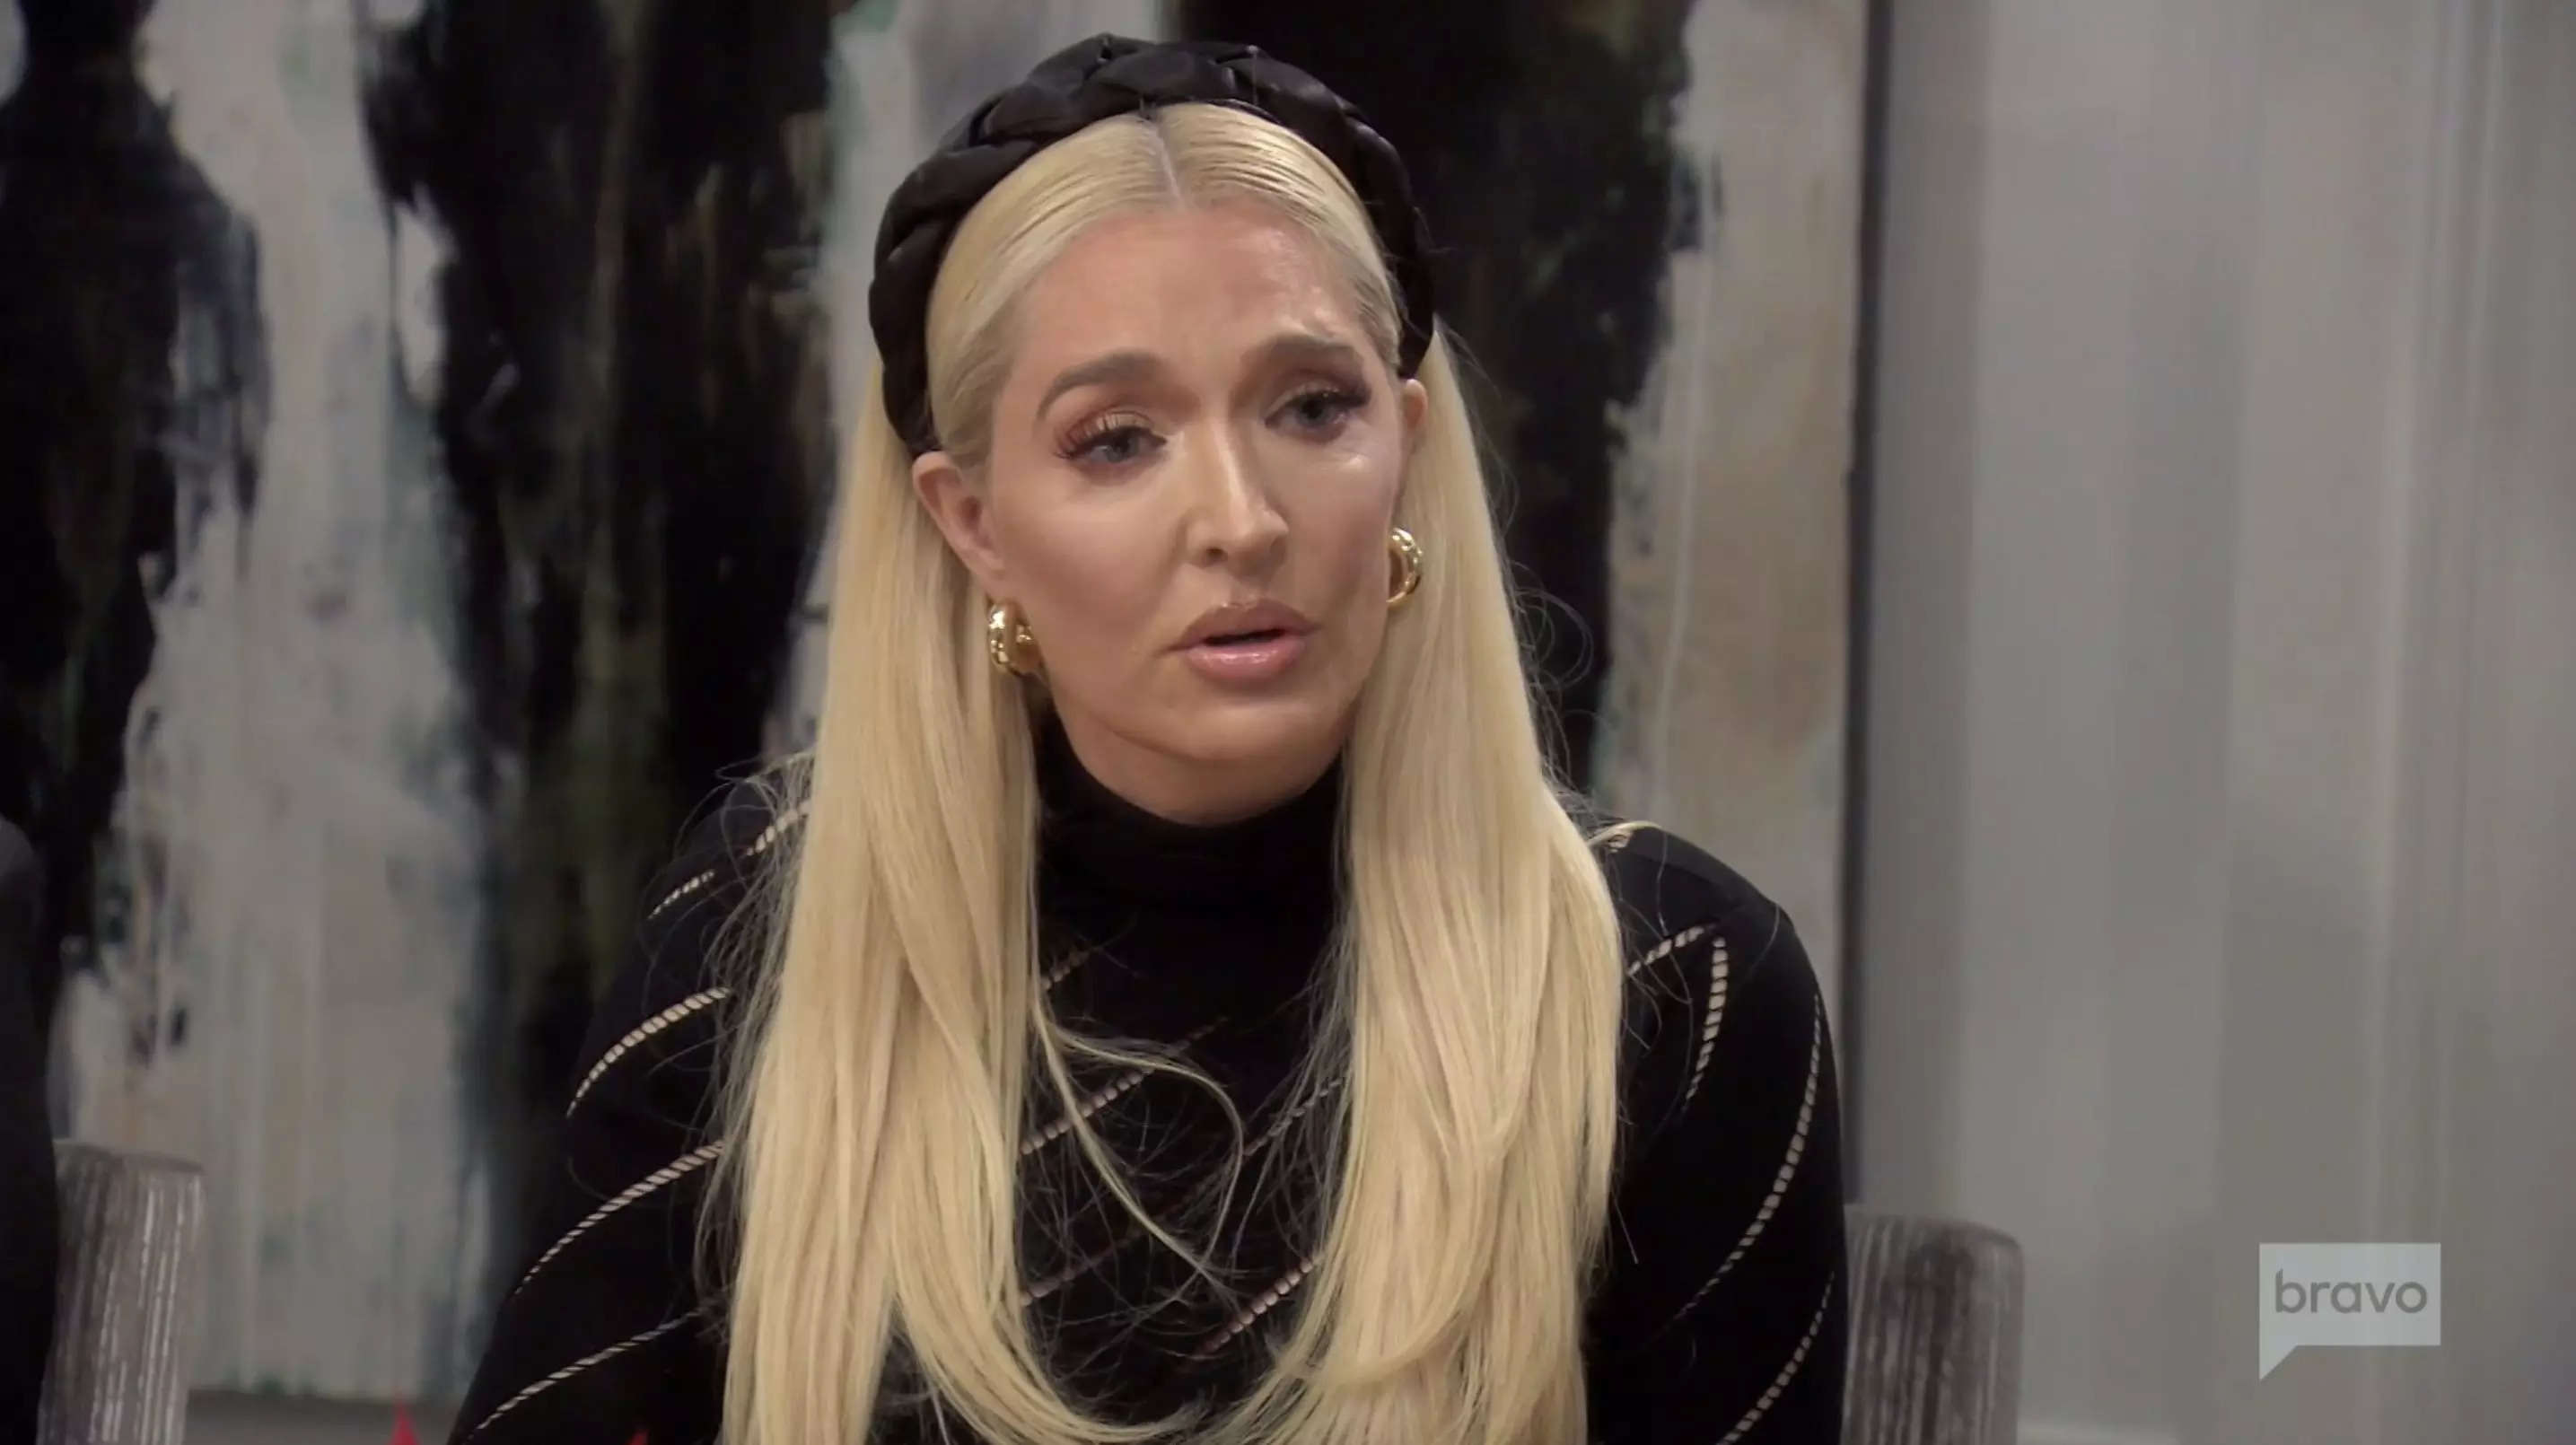 Erika Jayne on "Real Housewives of Beverly Hills"